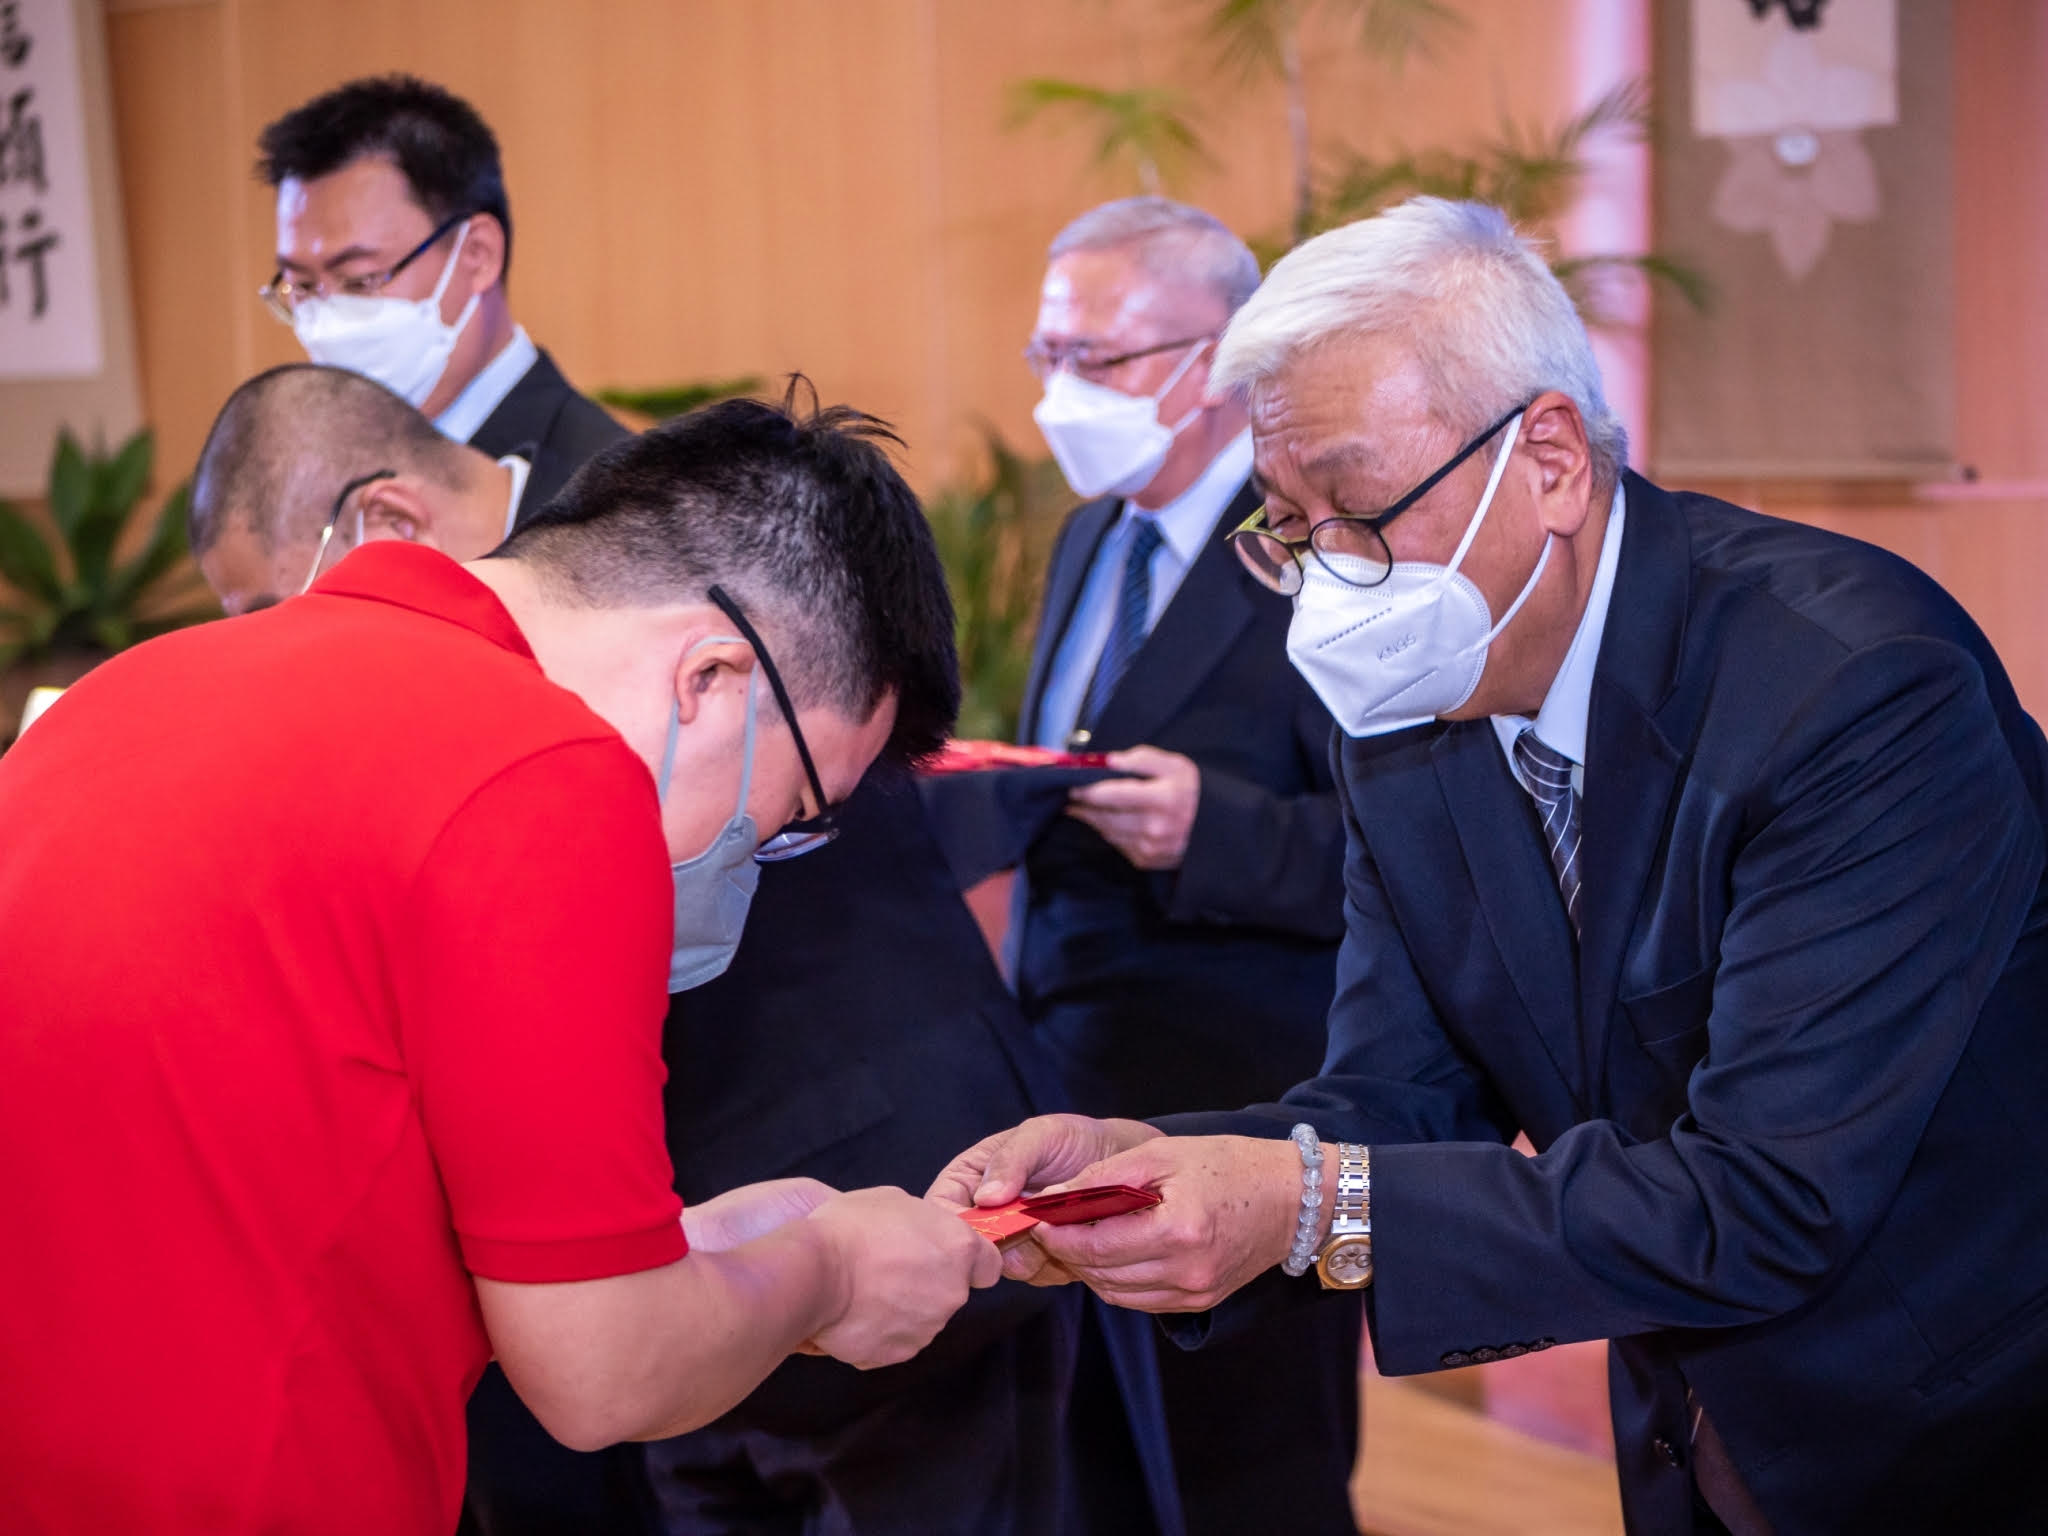 Tzu Chi Philippines CEO Henry Yuňez (right) presents a guest with a red angpao. 【Photo by Daniel Lazar】